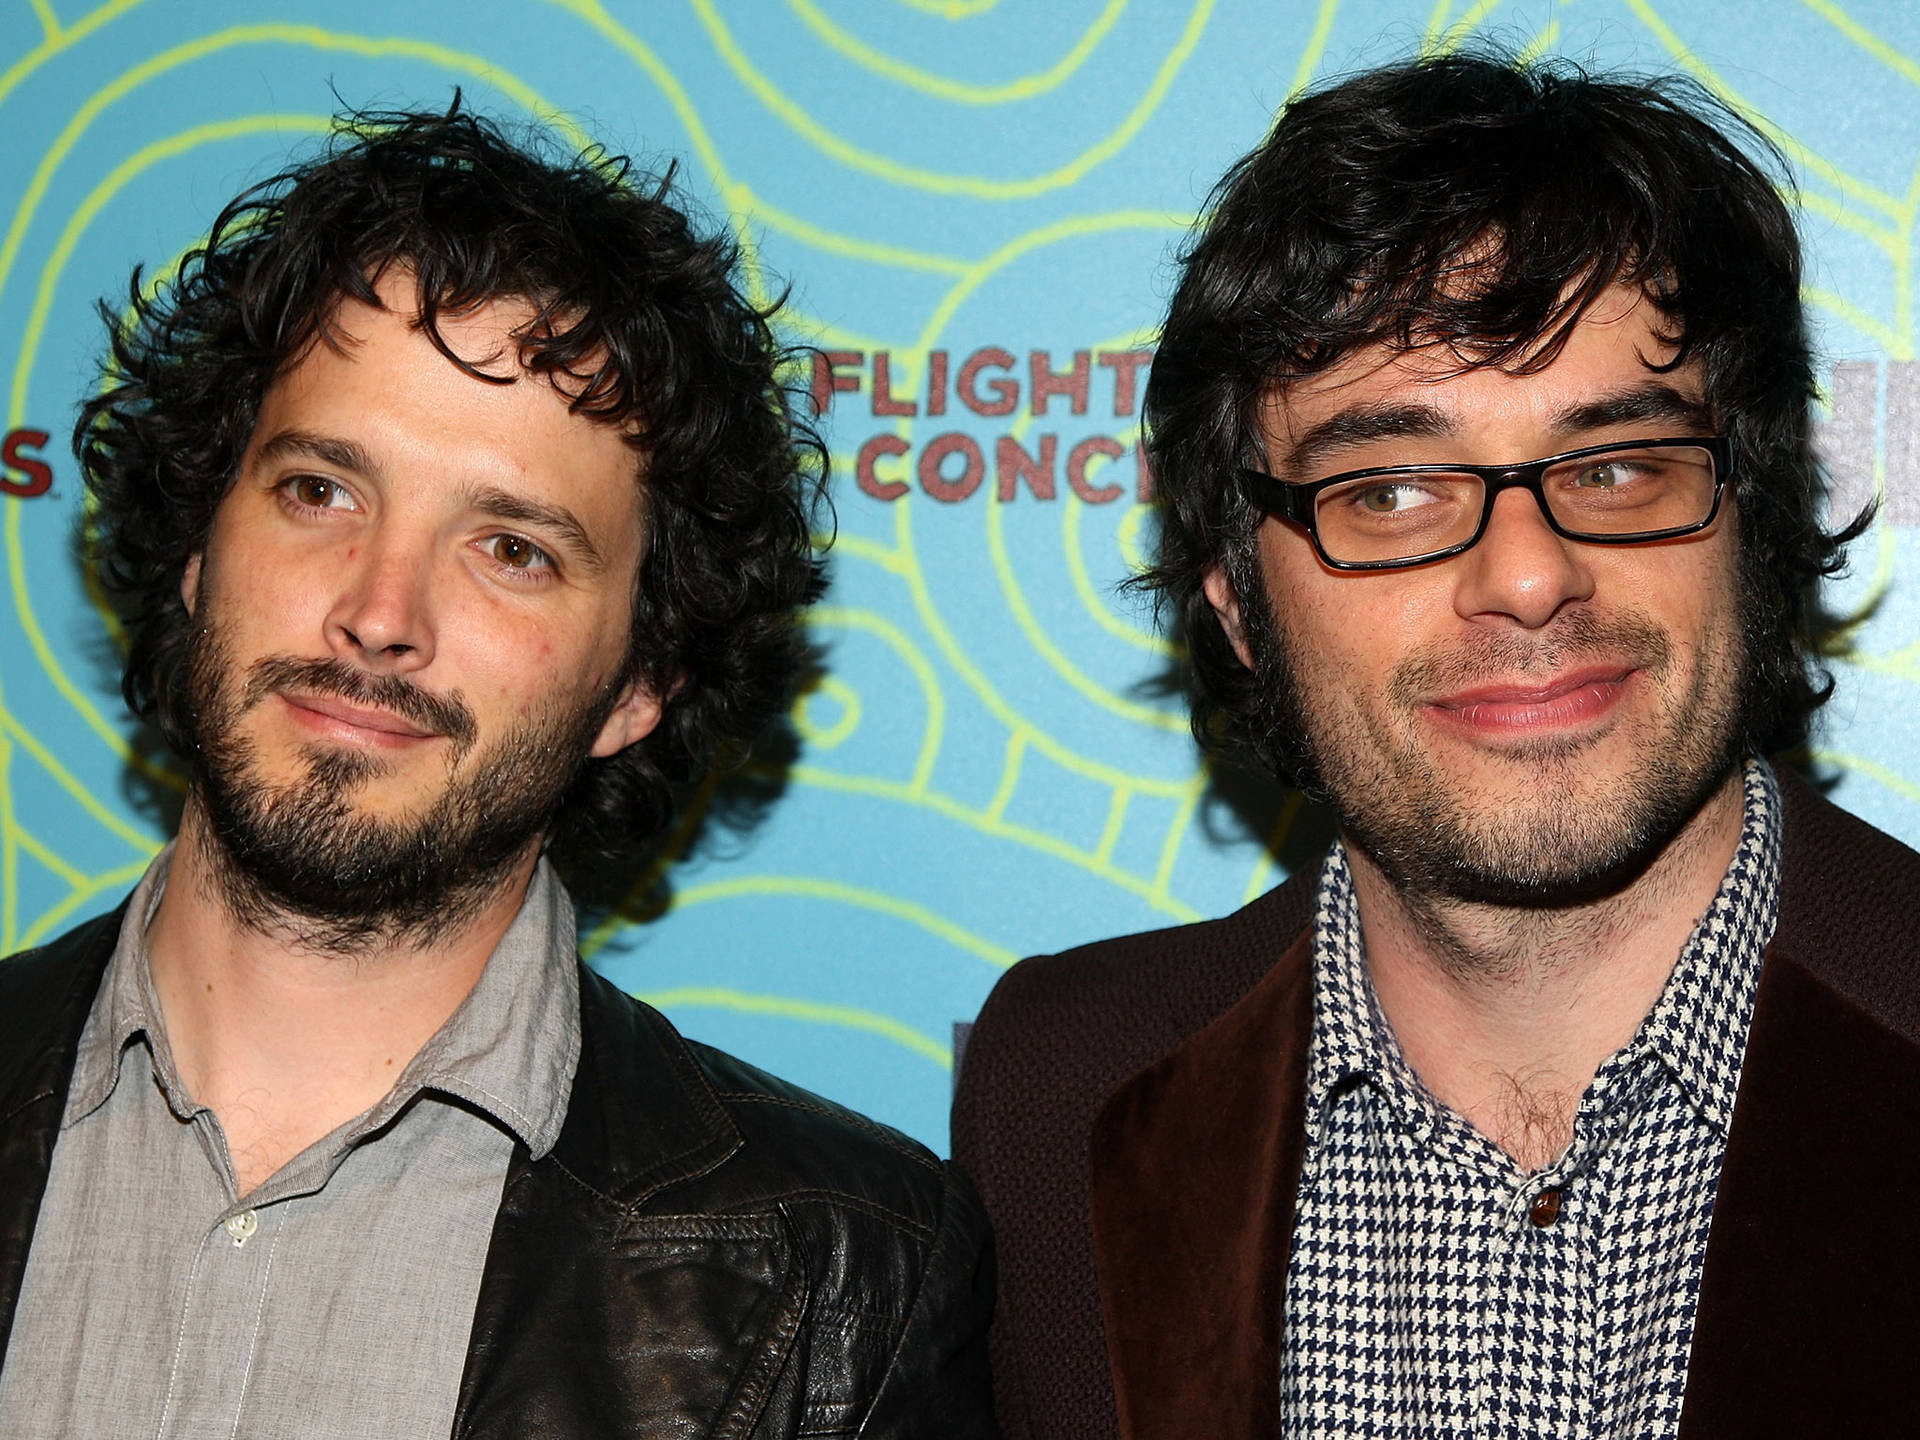 Flight Of The Conchords Album Launching Background